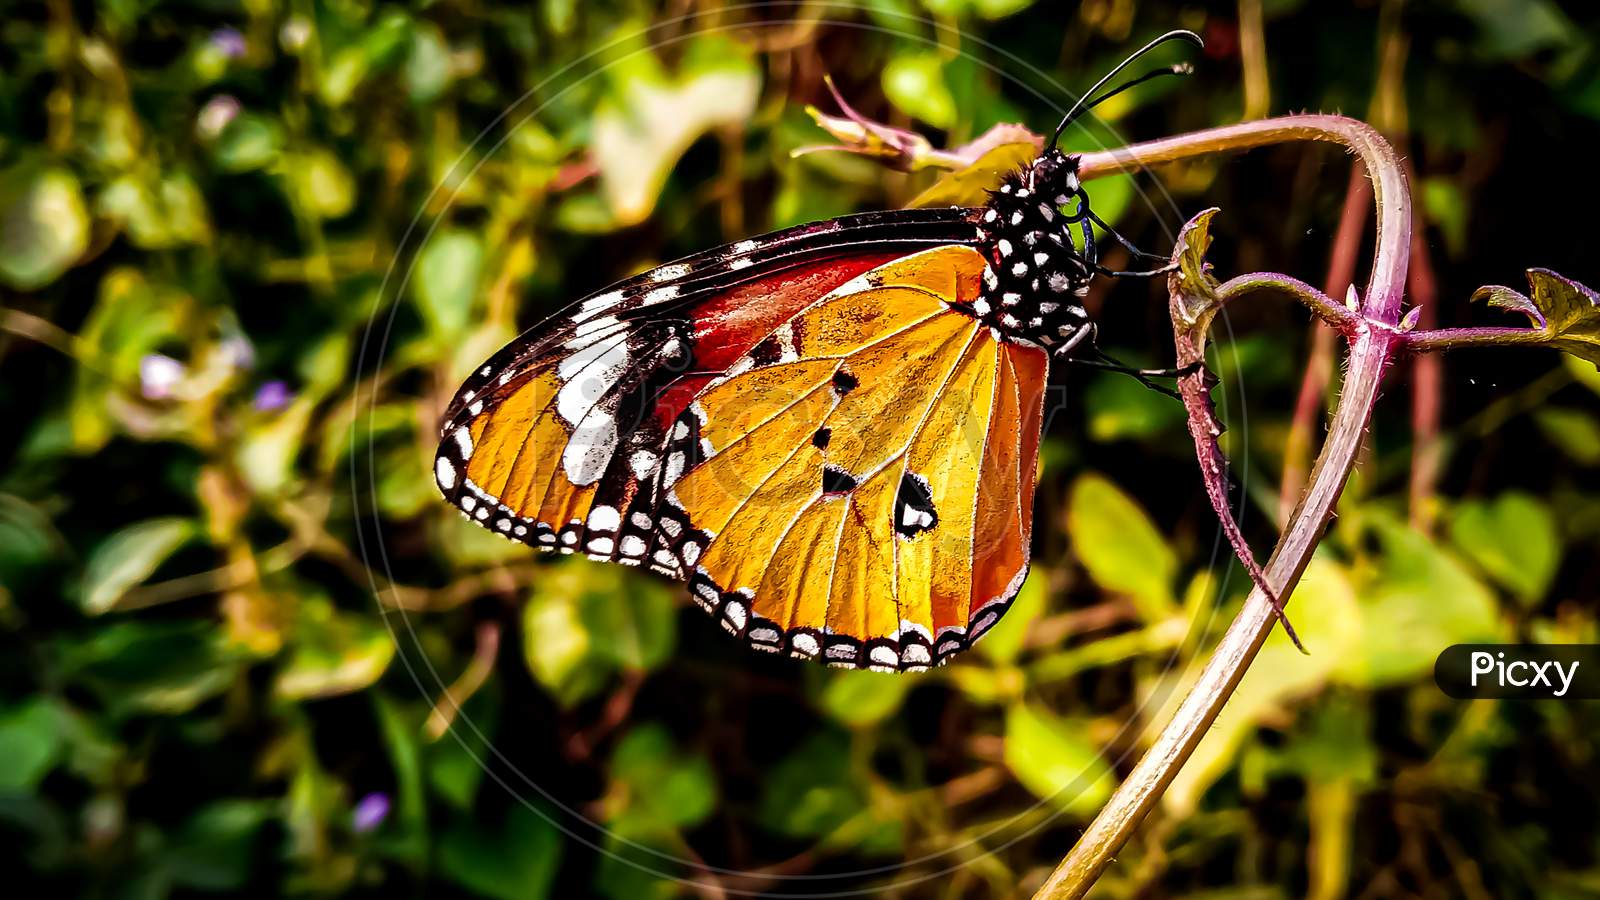 Plain Tiger butterfly image